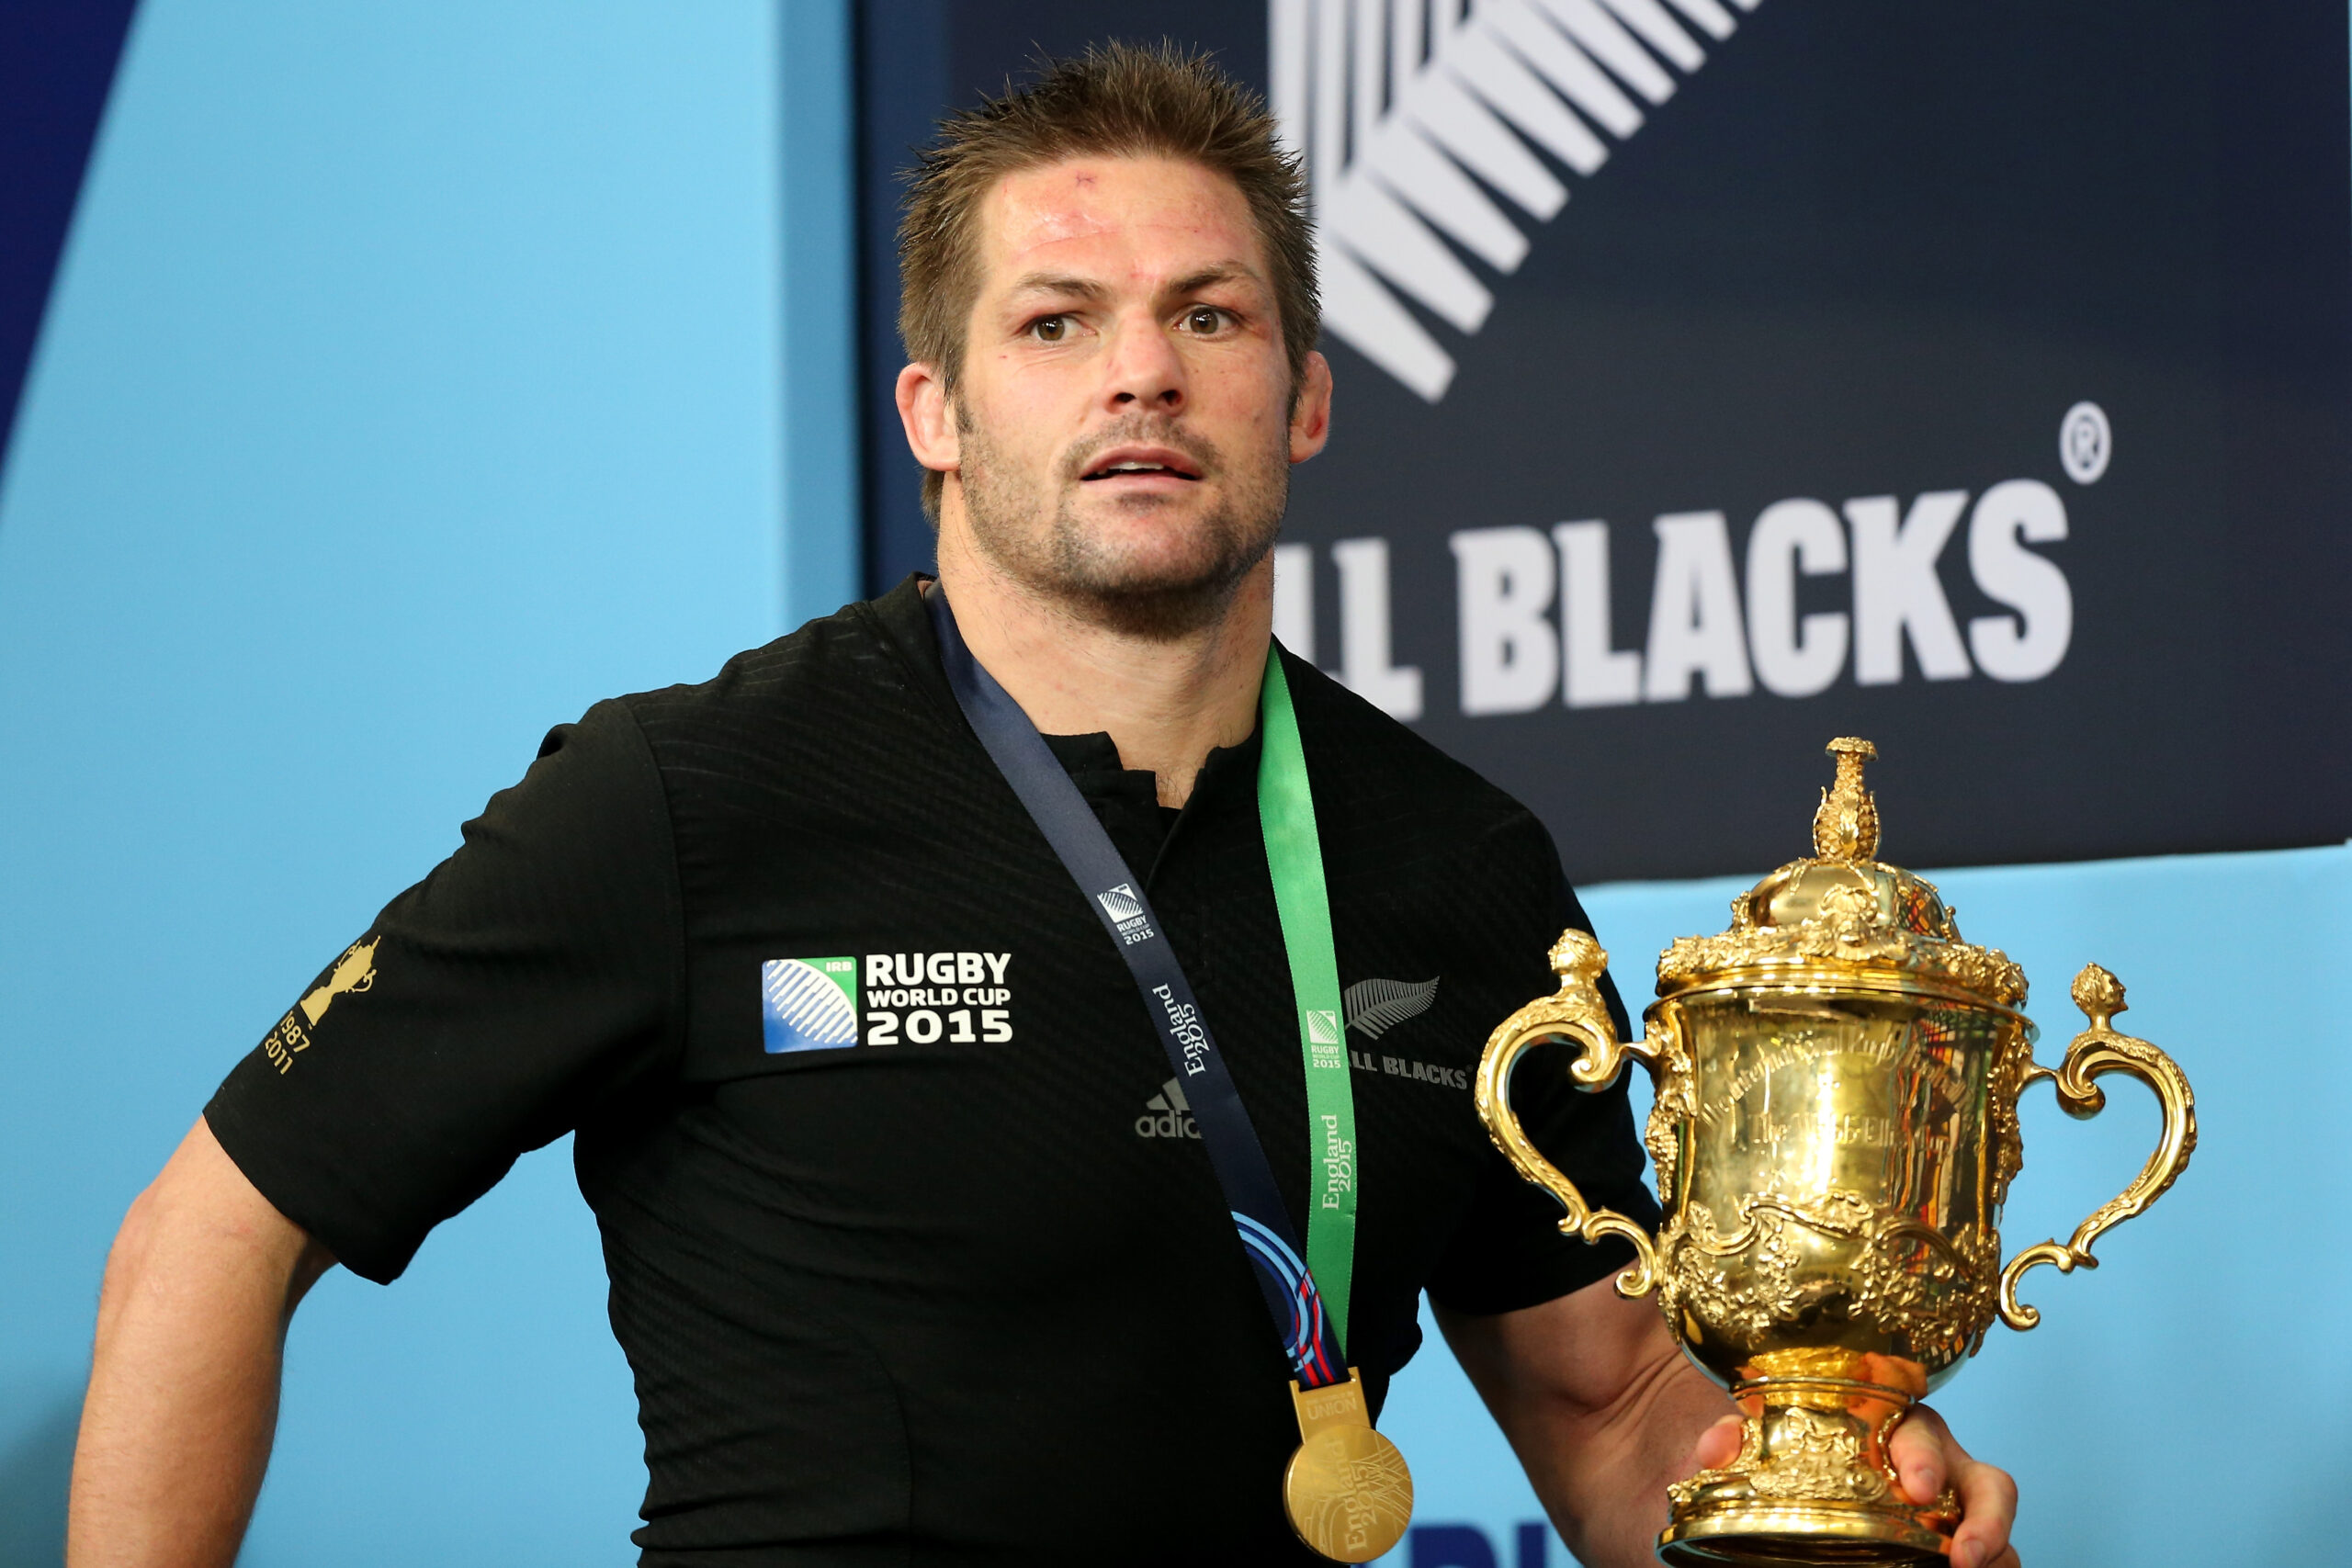 New Zealand v Australia – Final: Rugby World Cup 2015